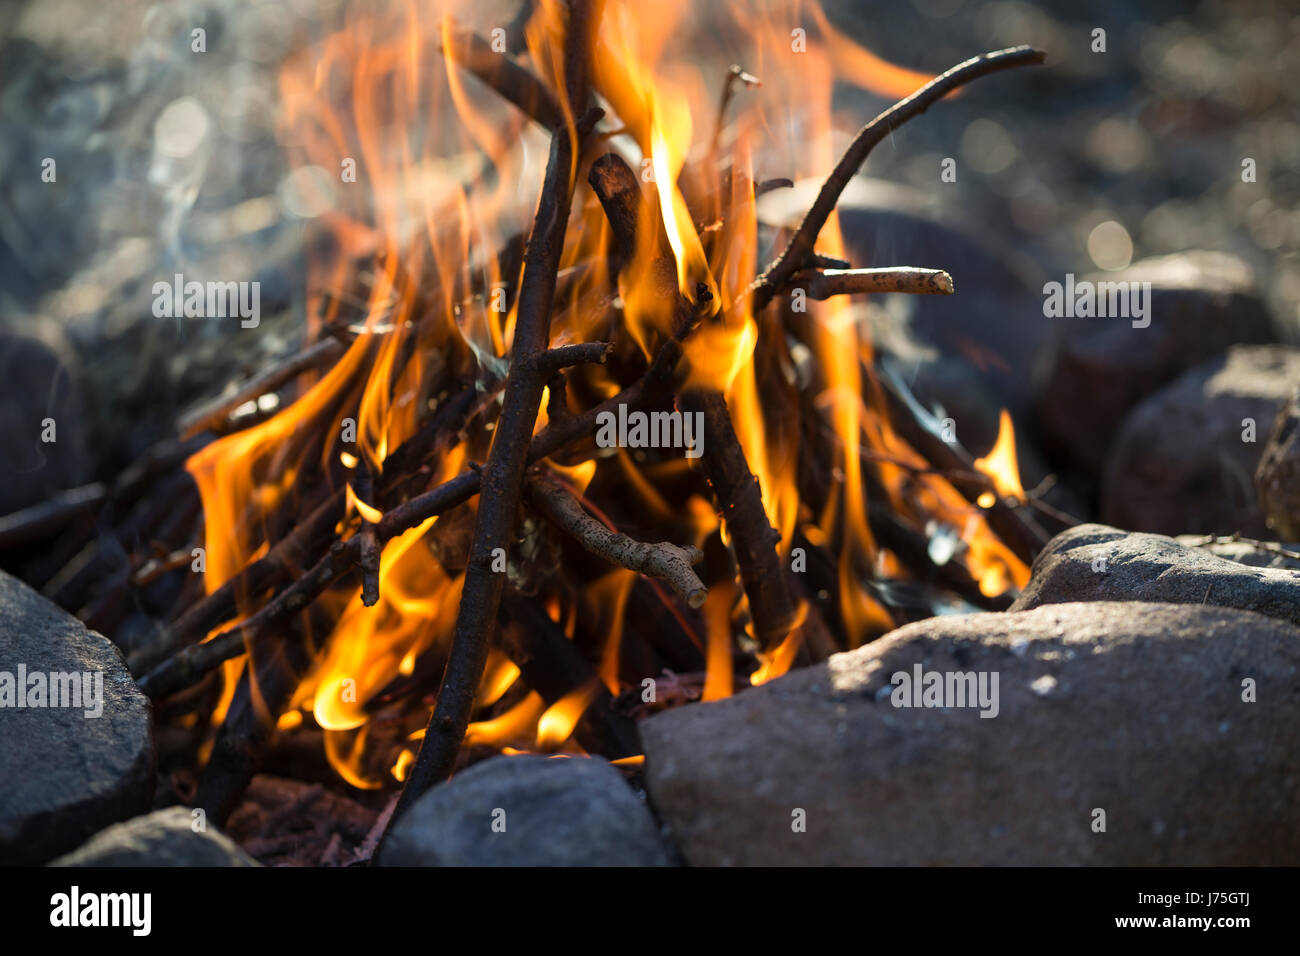 Lagerfeuer, Feuer, Outdoor, Feuerstelle, Campen, fire, bonfire, campfire, camping Stock Photo